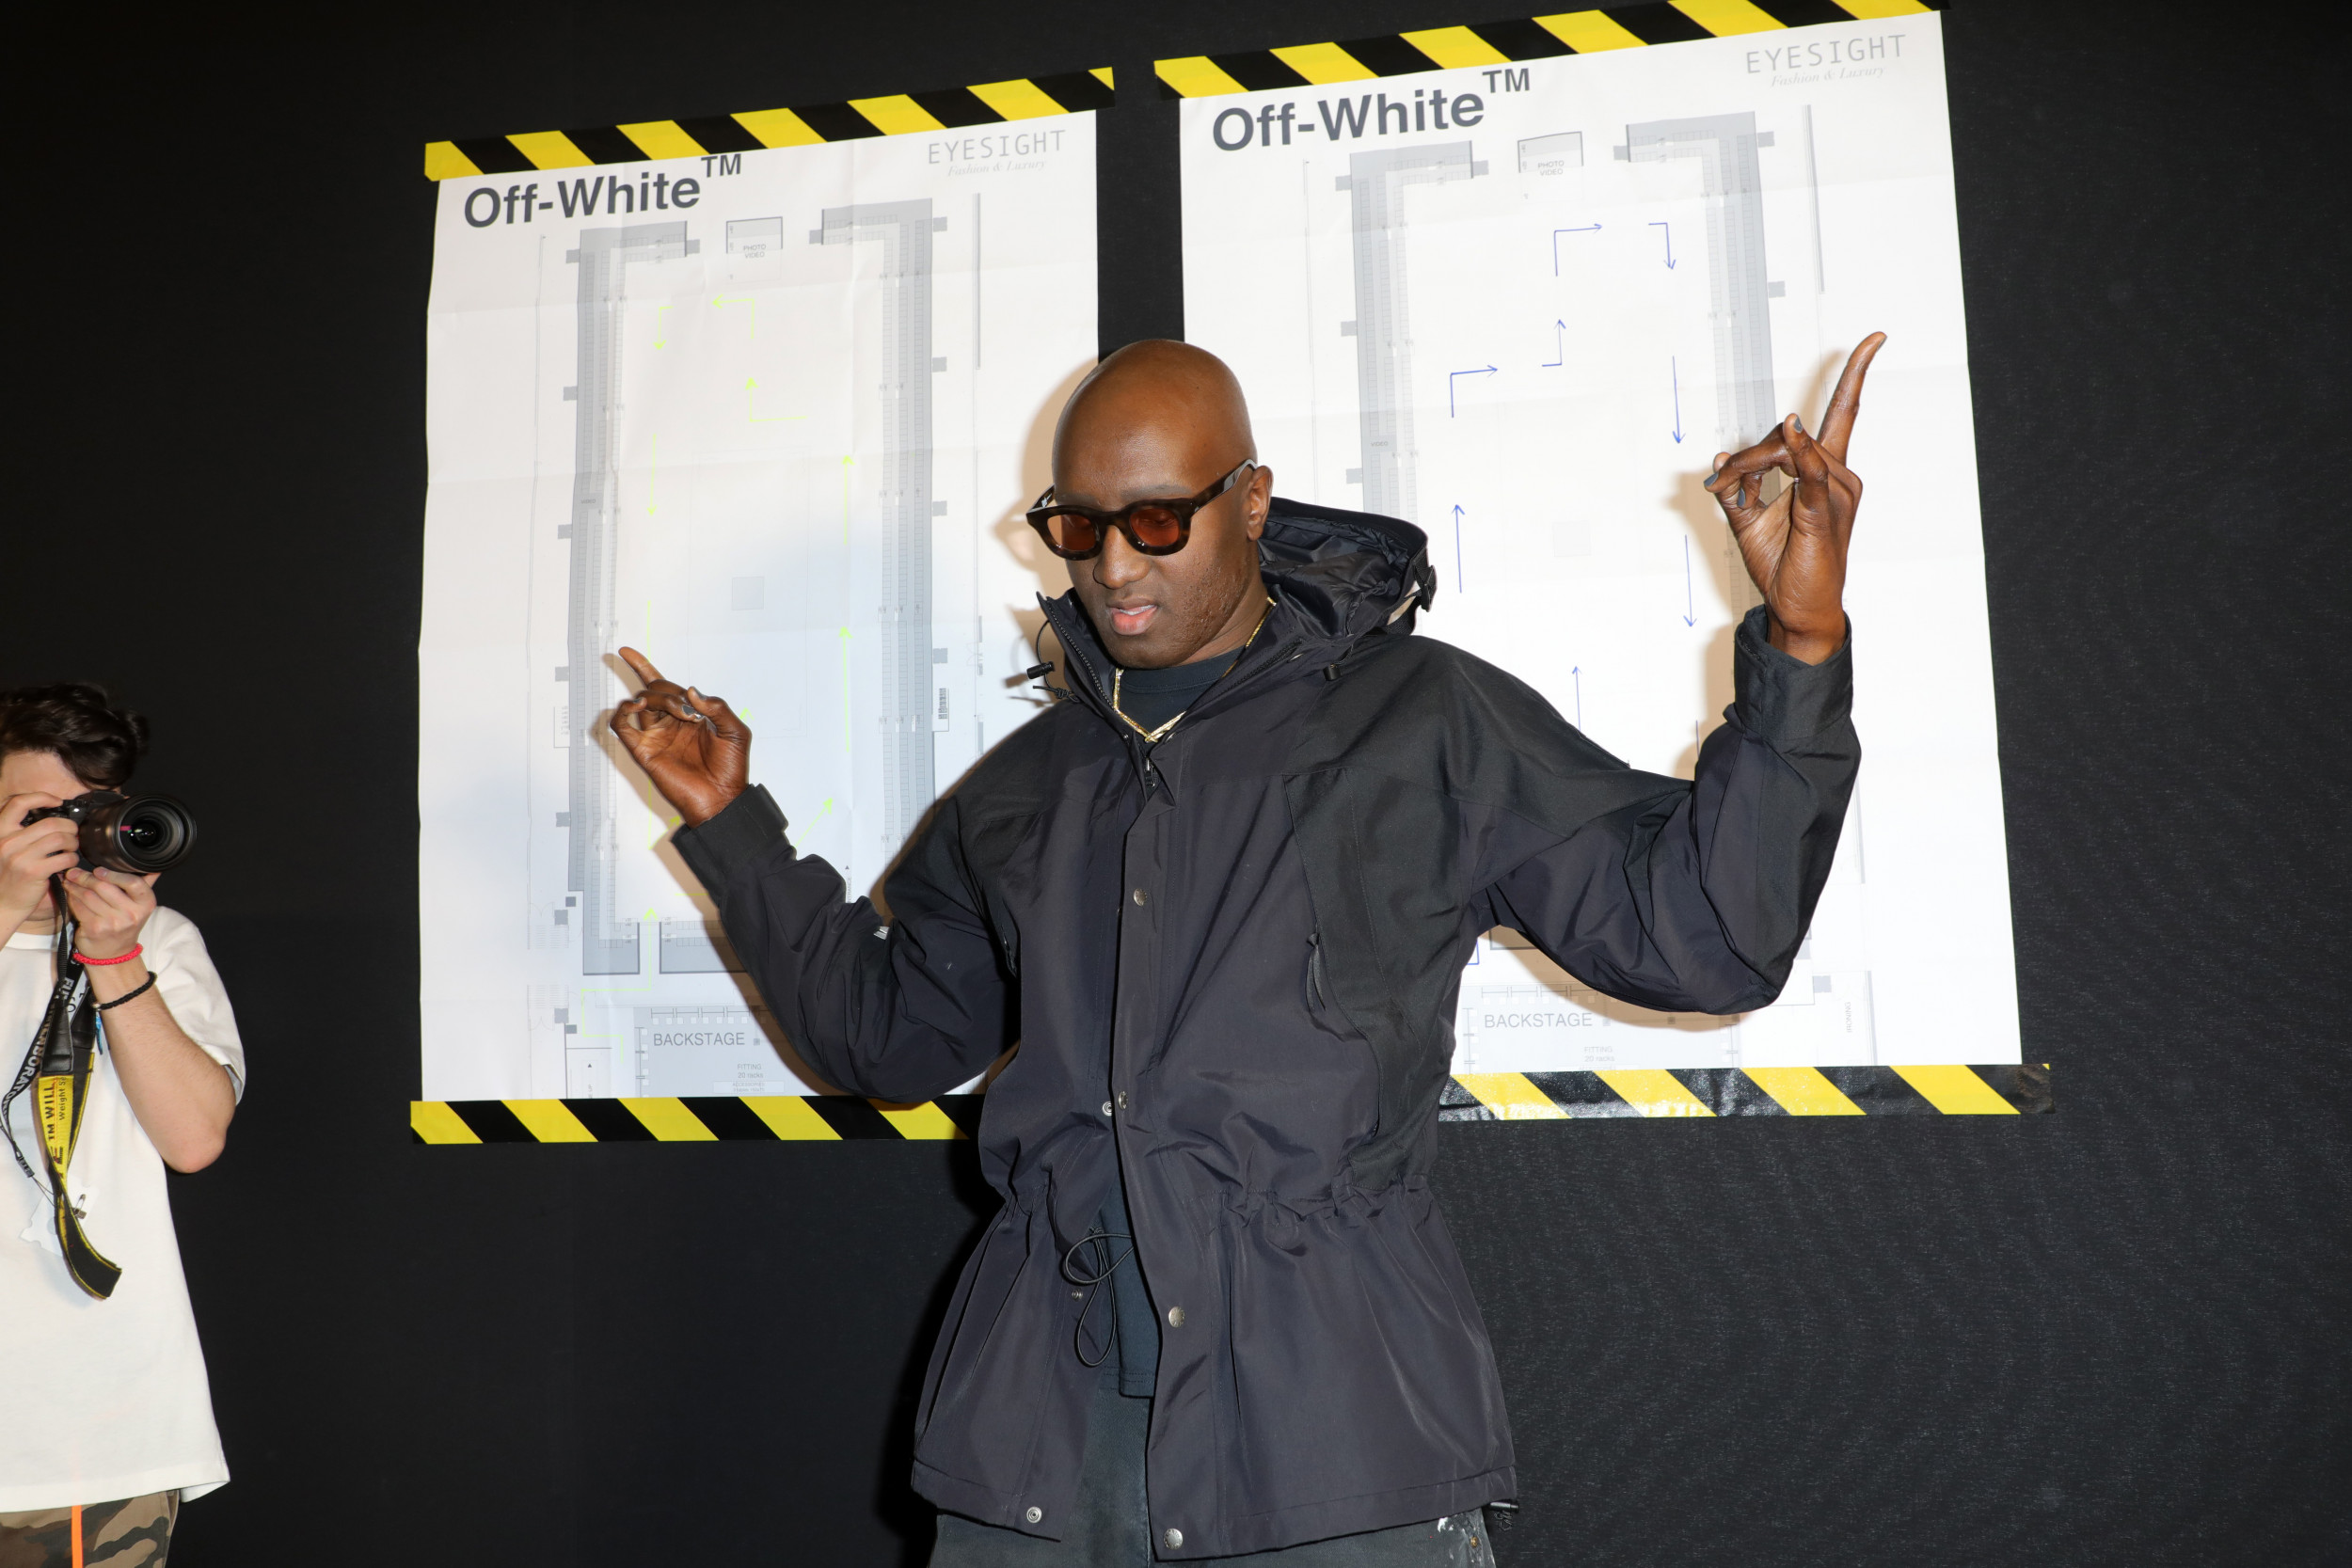 Interview: Virgil Abloh on Trolling Fashion Tropes and Icing Hip